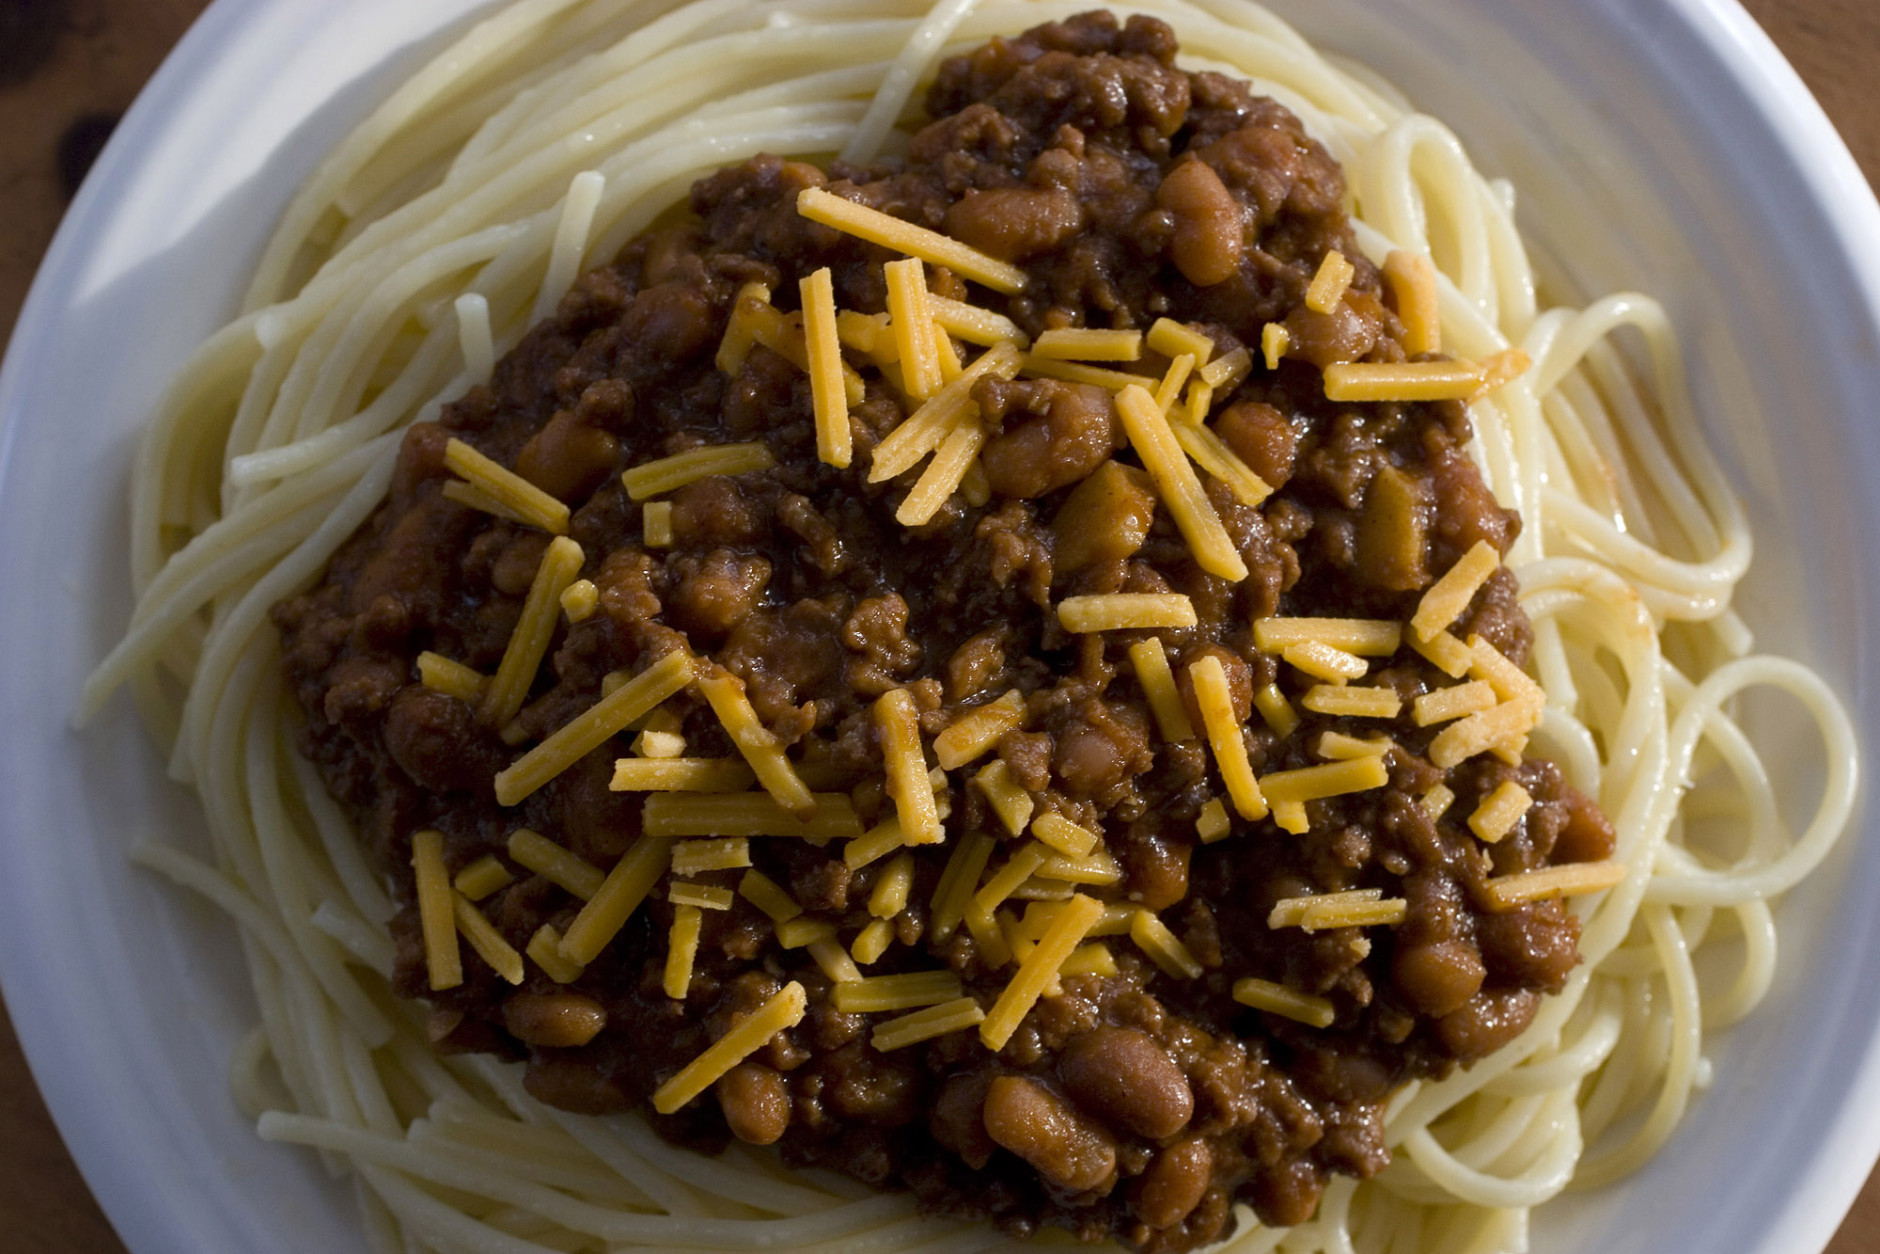 **FOR USE WITH AP LIFESTYLES**   Three-way Cincinnati Chili layers spaghetti, a quick cooking chili and cheese as seen here in this Tuesday, March 25, 2008 photo. The regional favorite is ordered by the number of toppings, with a four way having another topping like onion or beans.    (AP Photo/Larry Crowe)